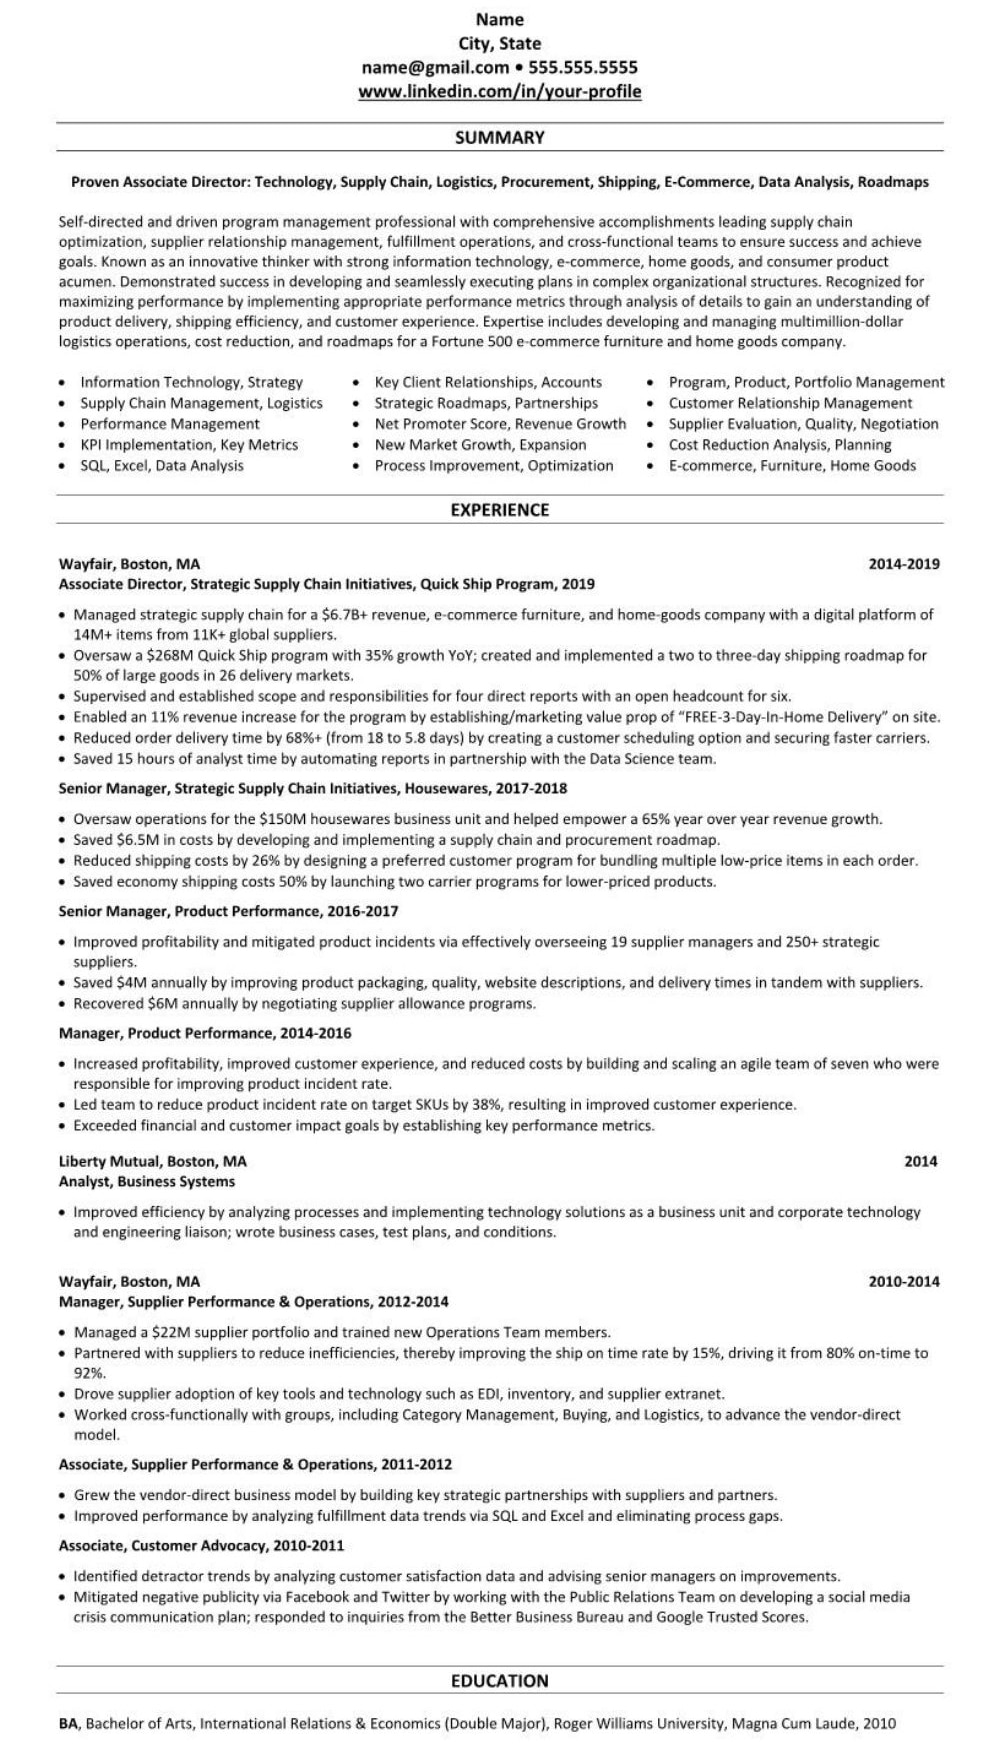 sample professional/executive resume example e-commerce online retail 2726